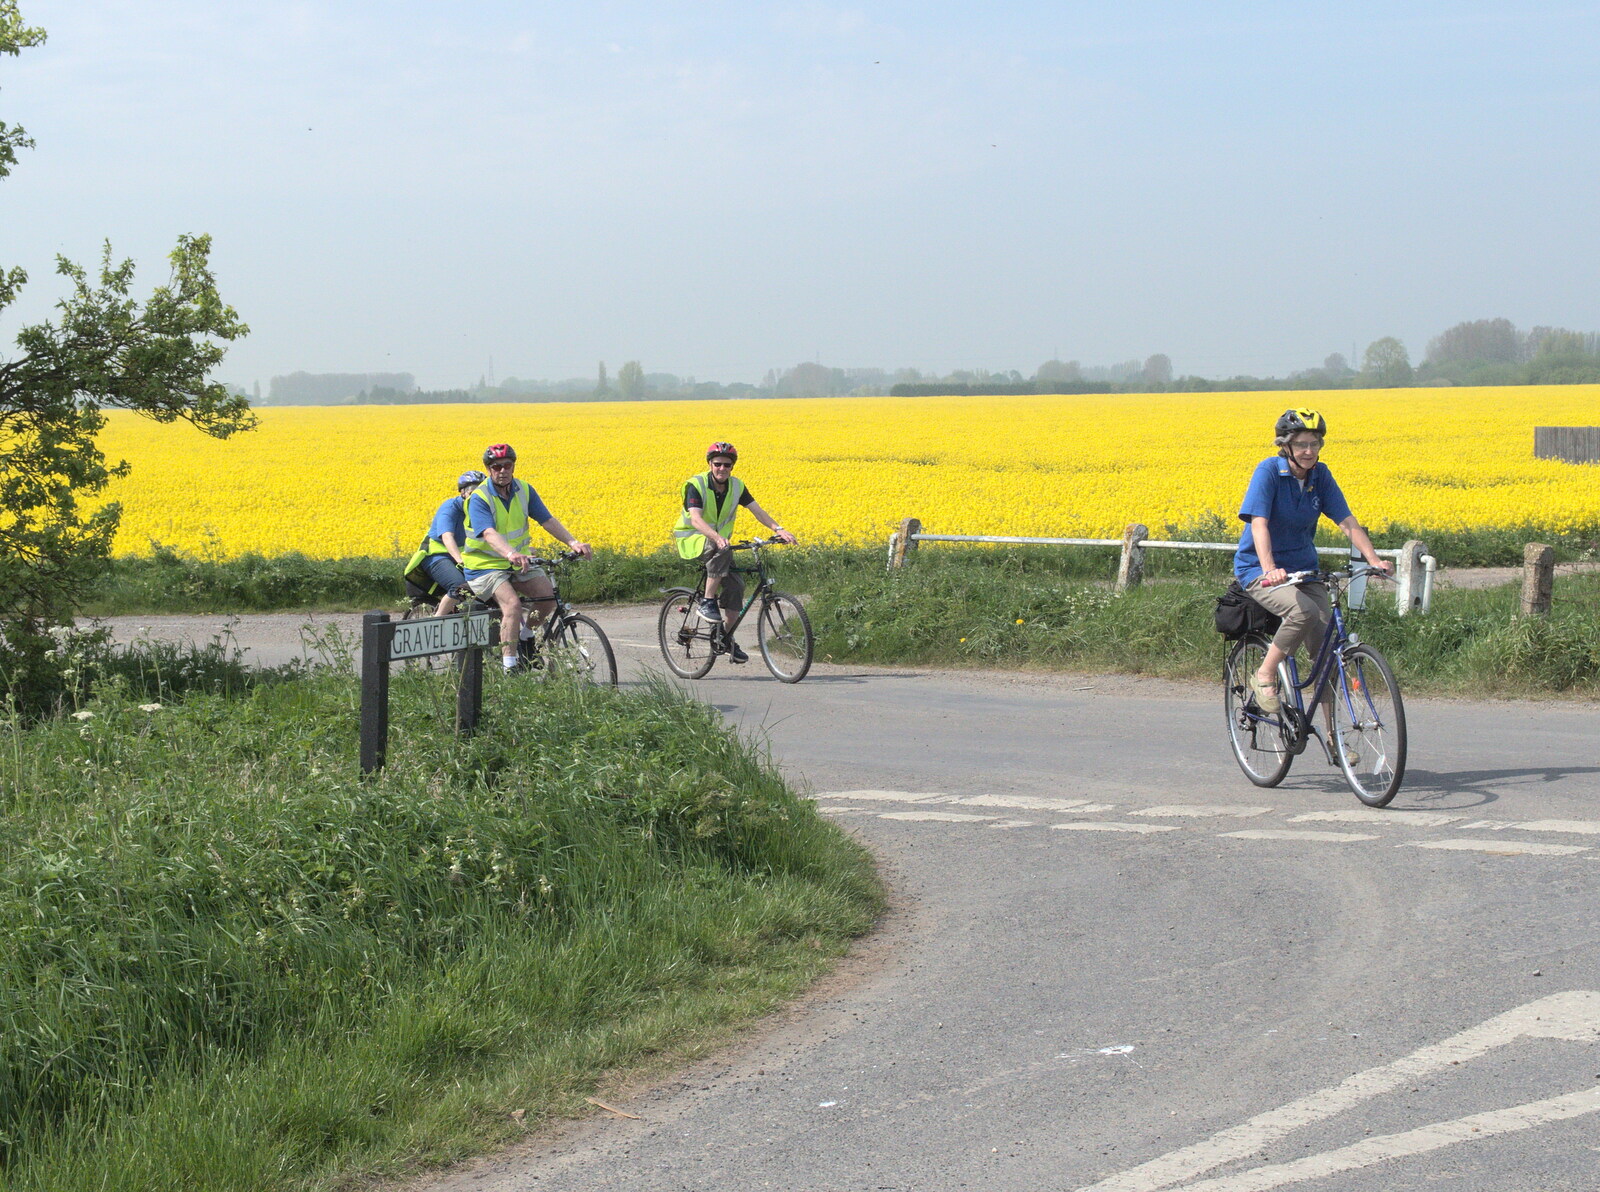 The bike club turns right onto Gravel Bank from The BSCC Cycling Weekender, Outwell, West Norfolk - 7th May 2016